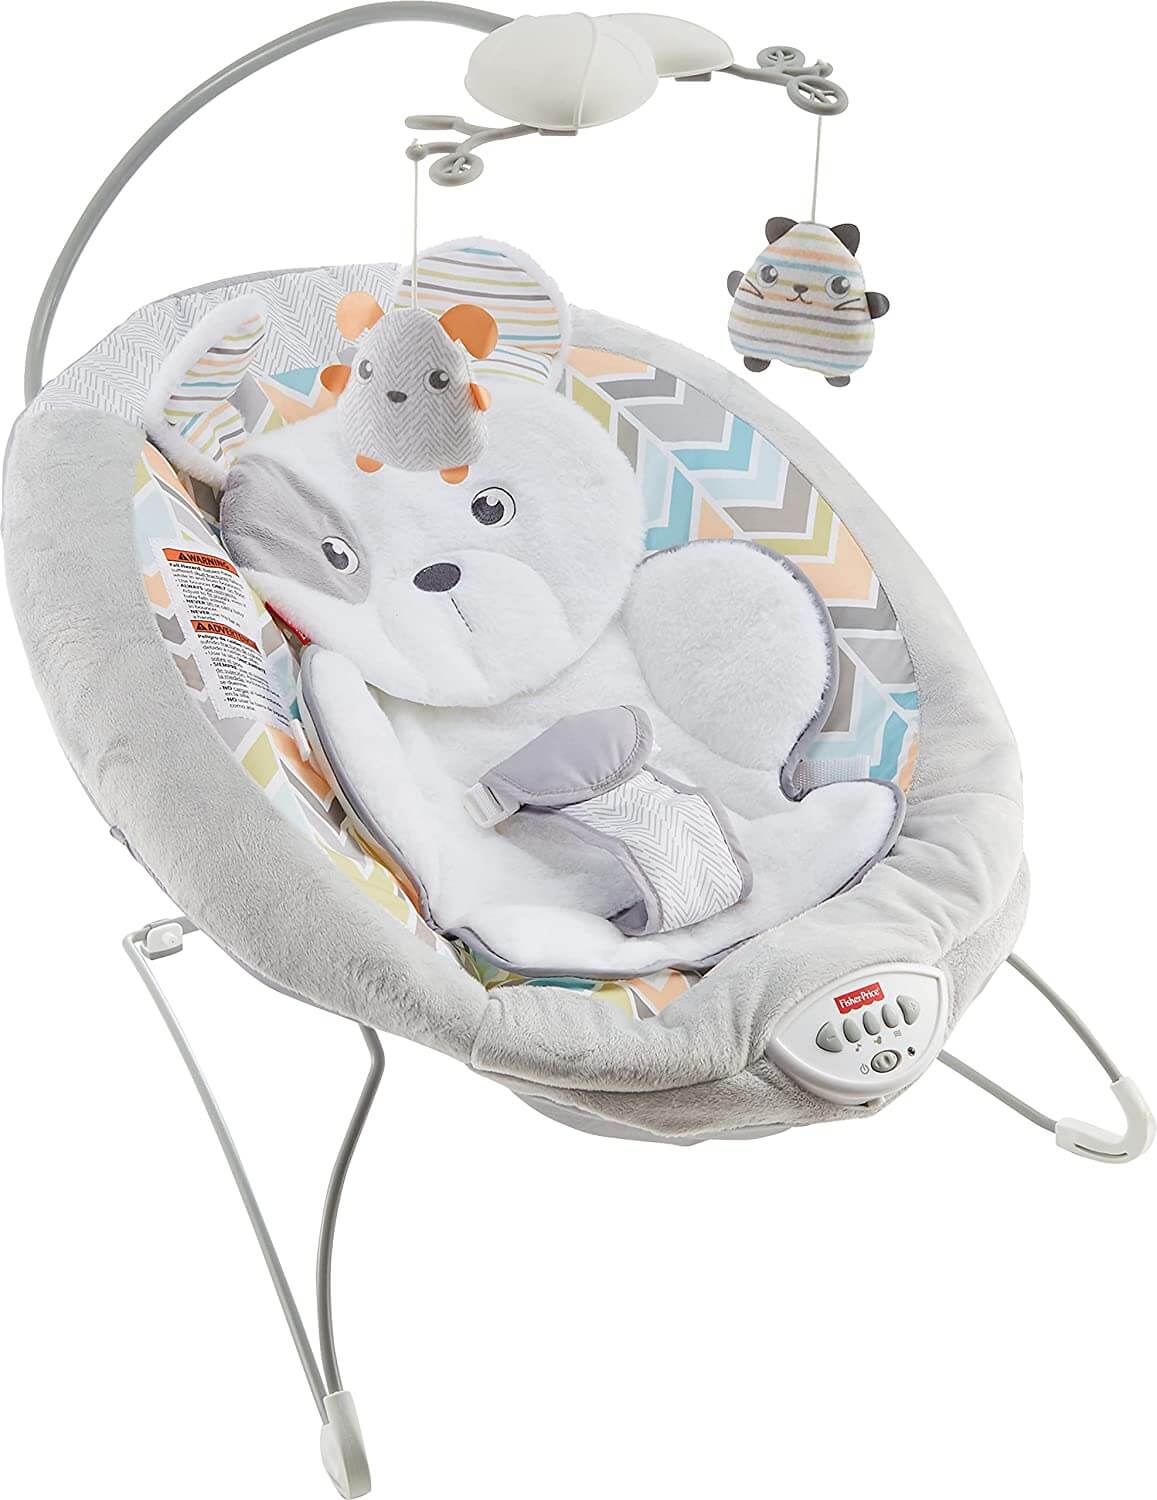 white and grey baby swing 